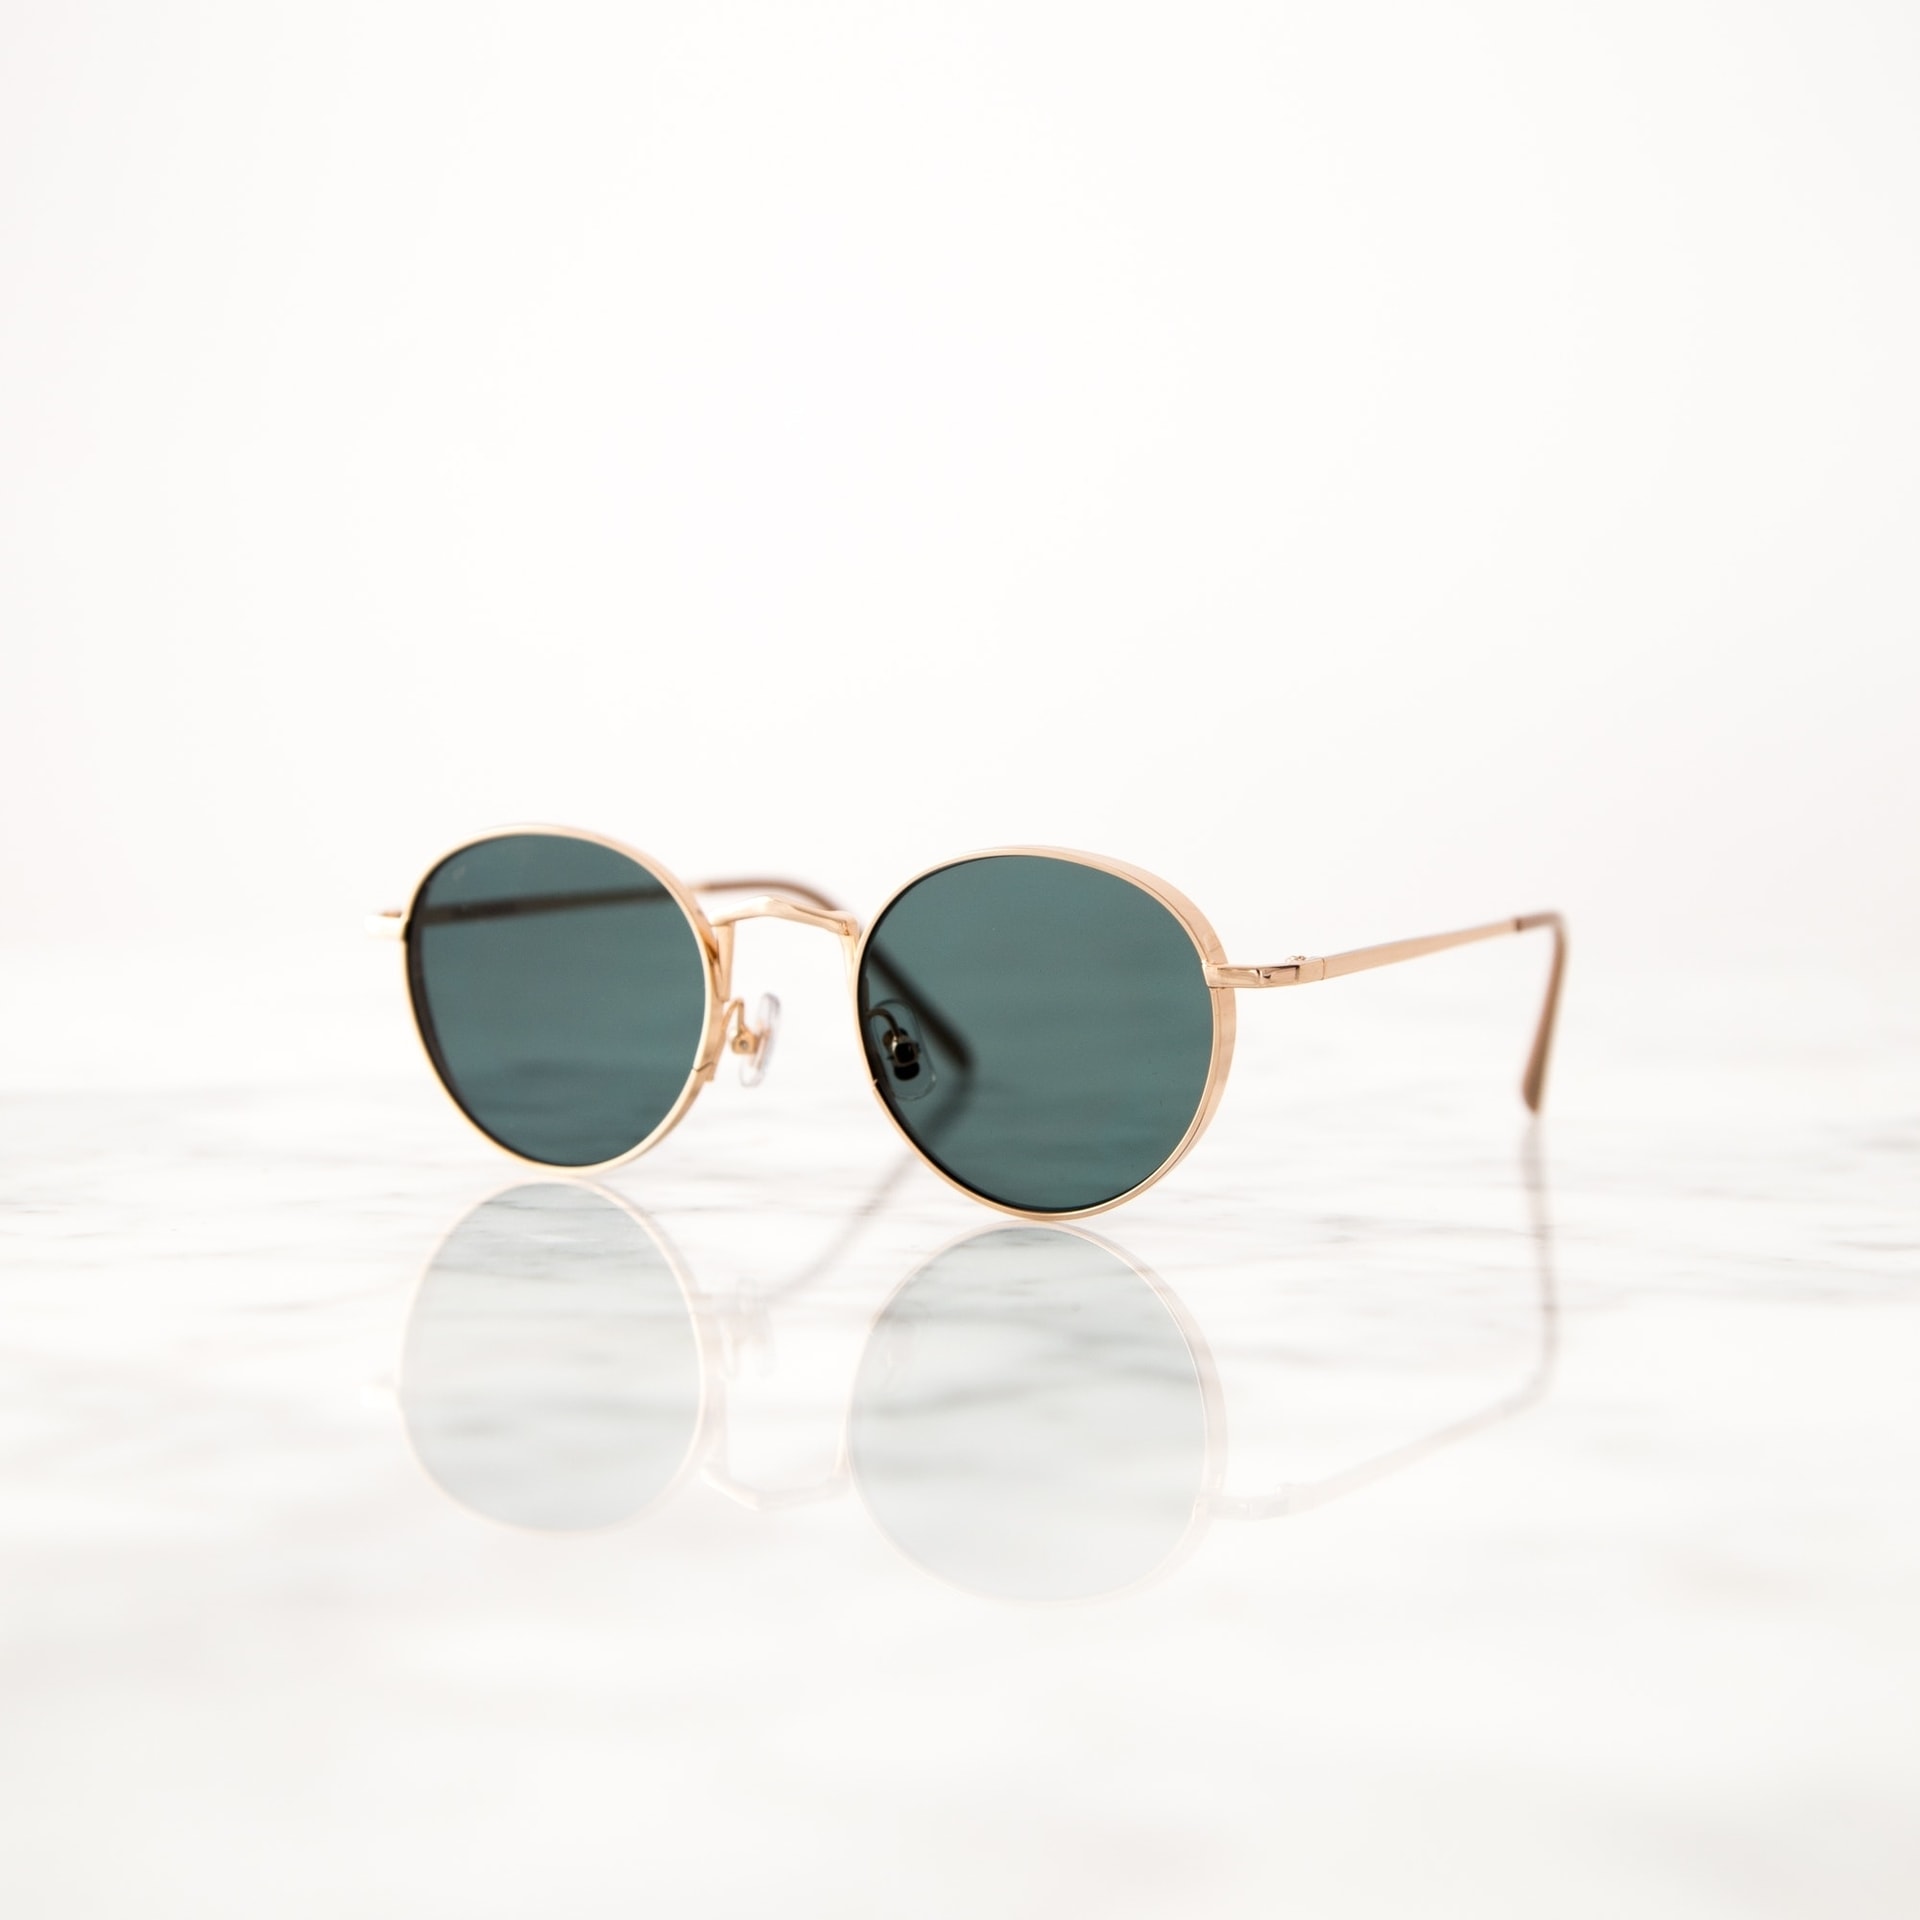 Gold frame sunglasses on reflective marble surface